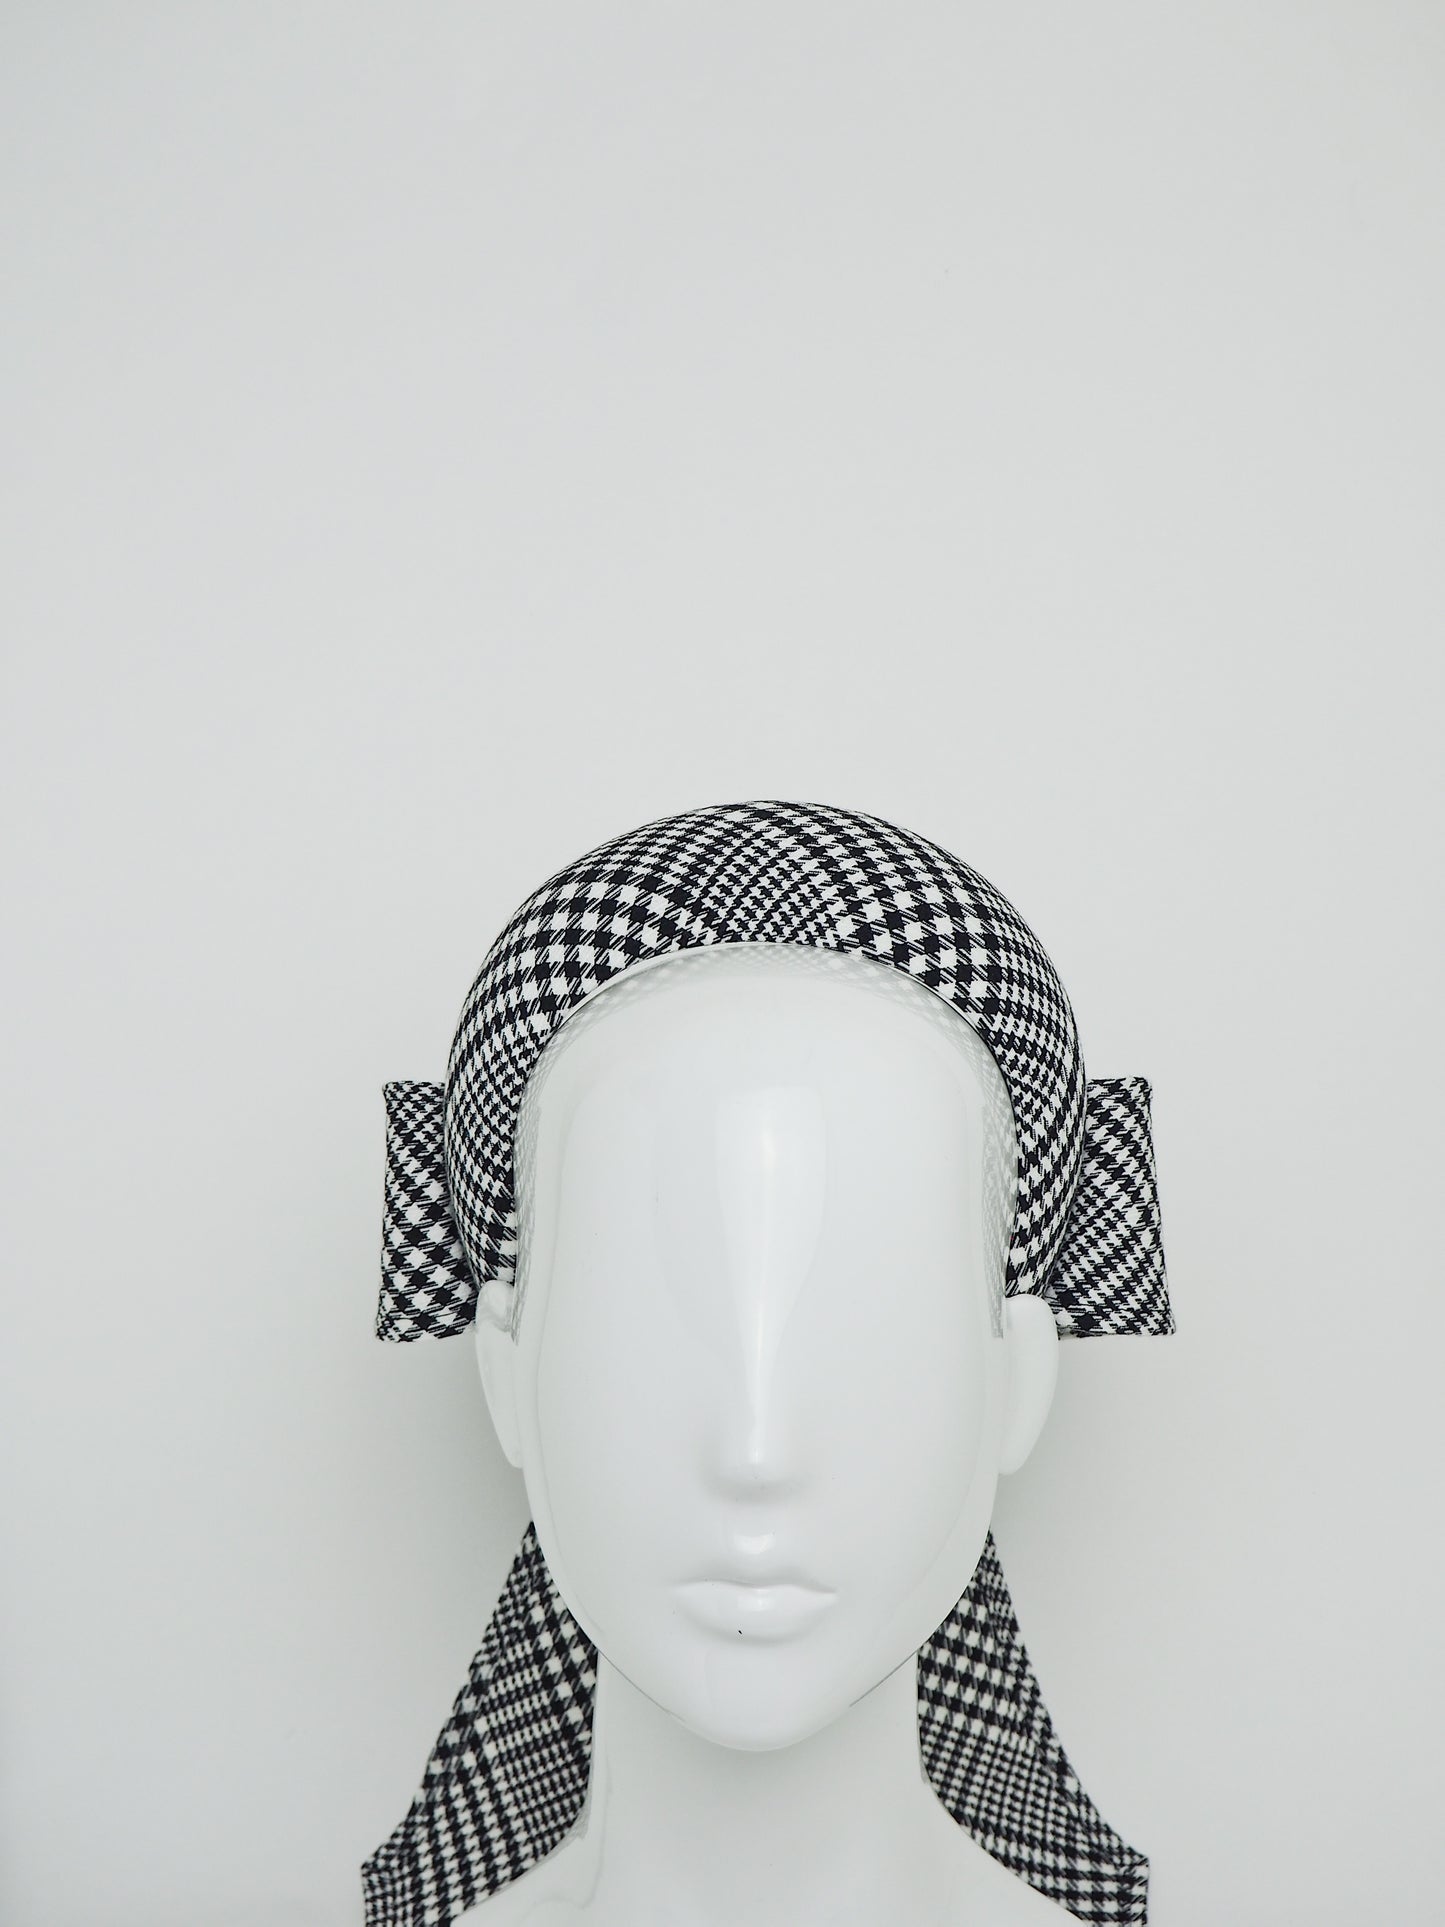 Tied in a Bow - Houndstooth 3d headband with bow.